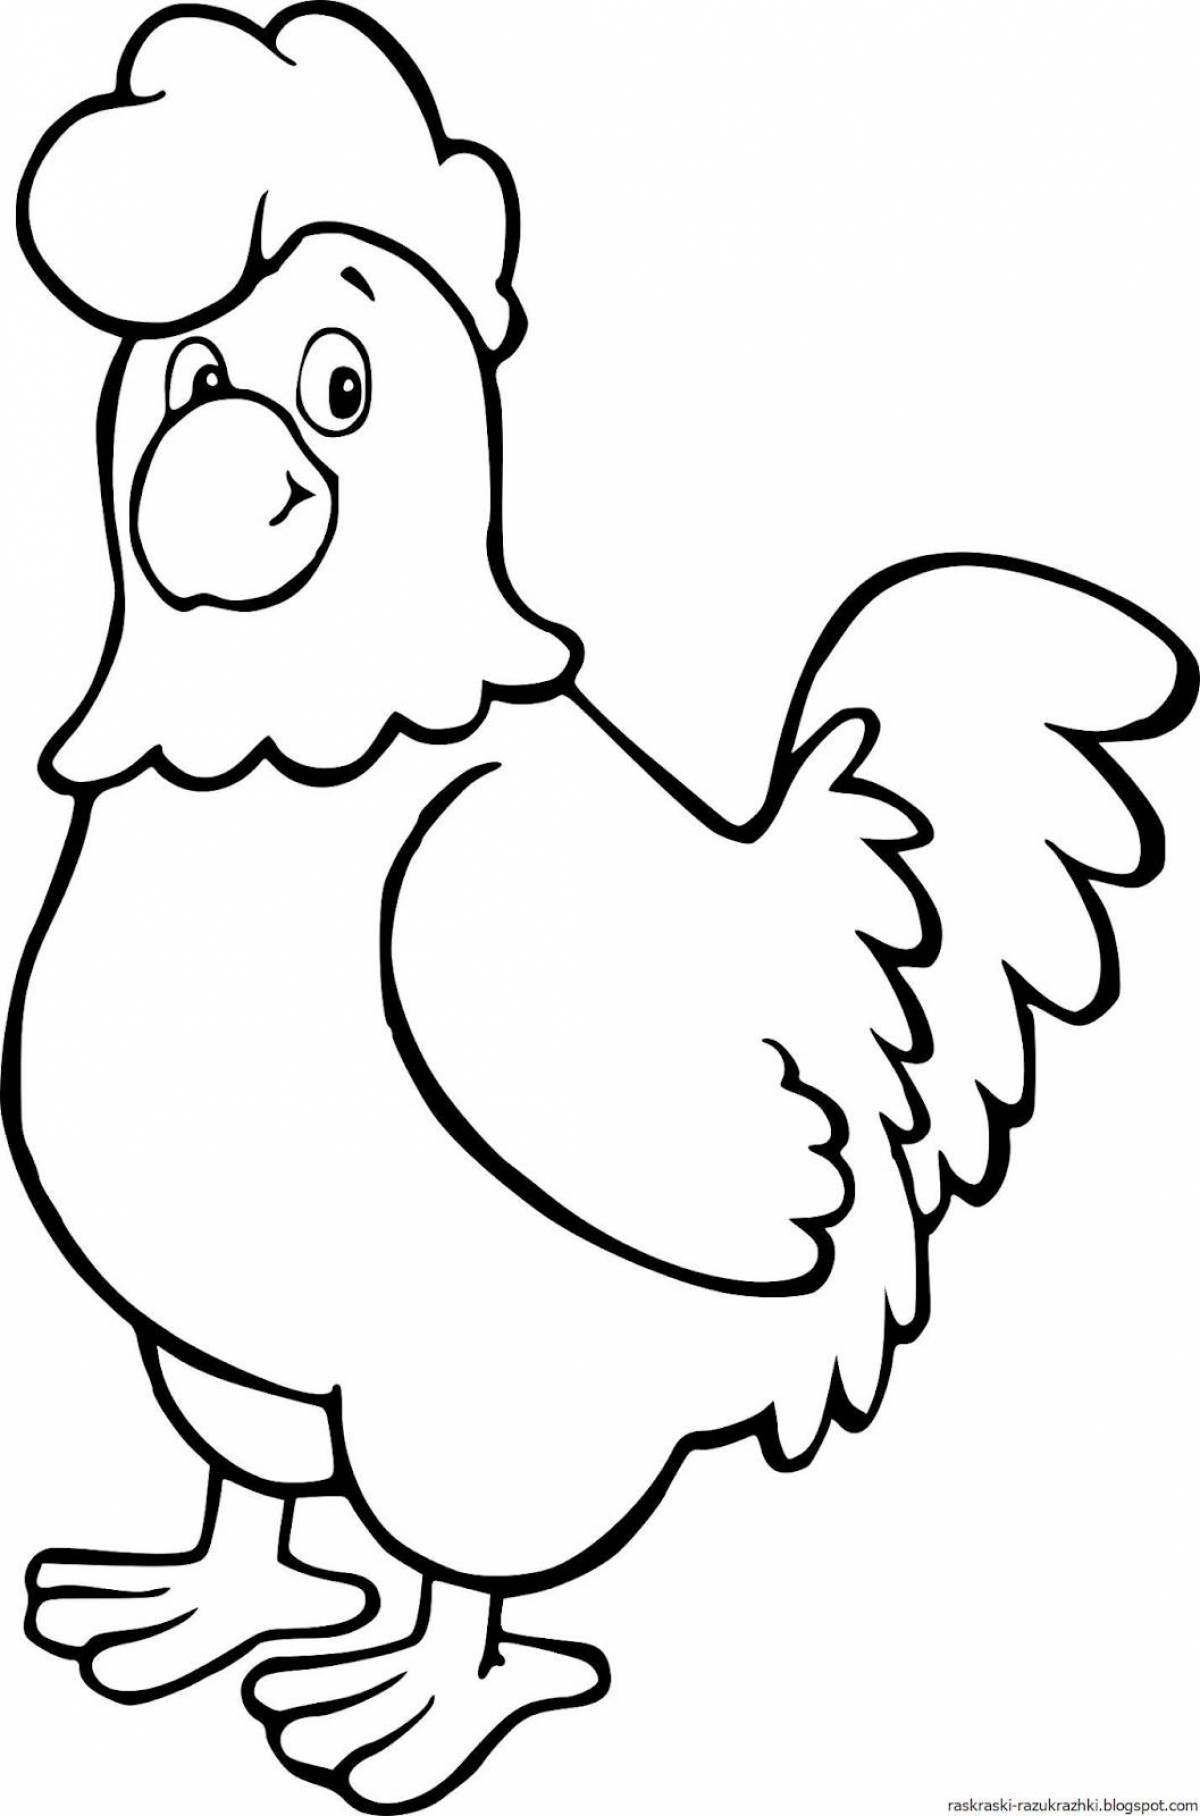 Animated chicken coloring page for kids